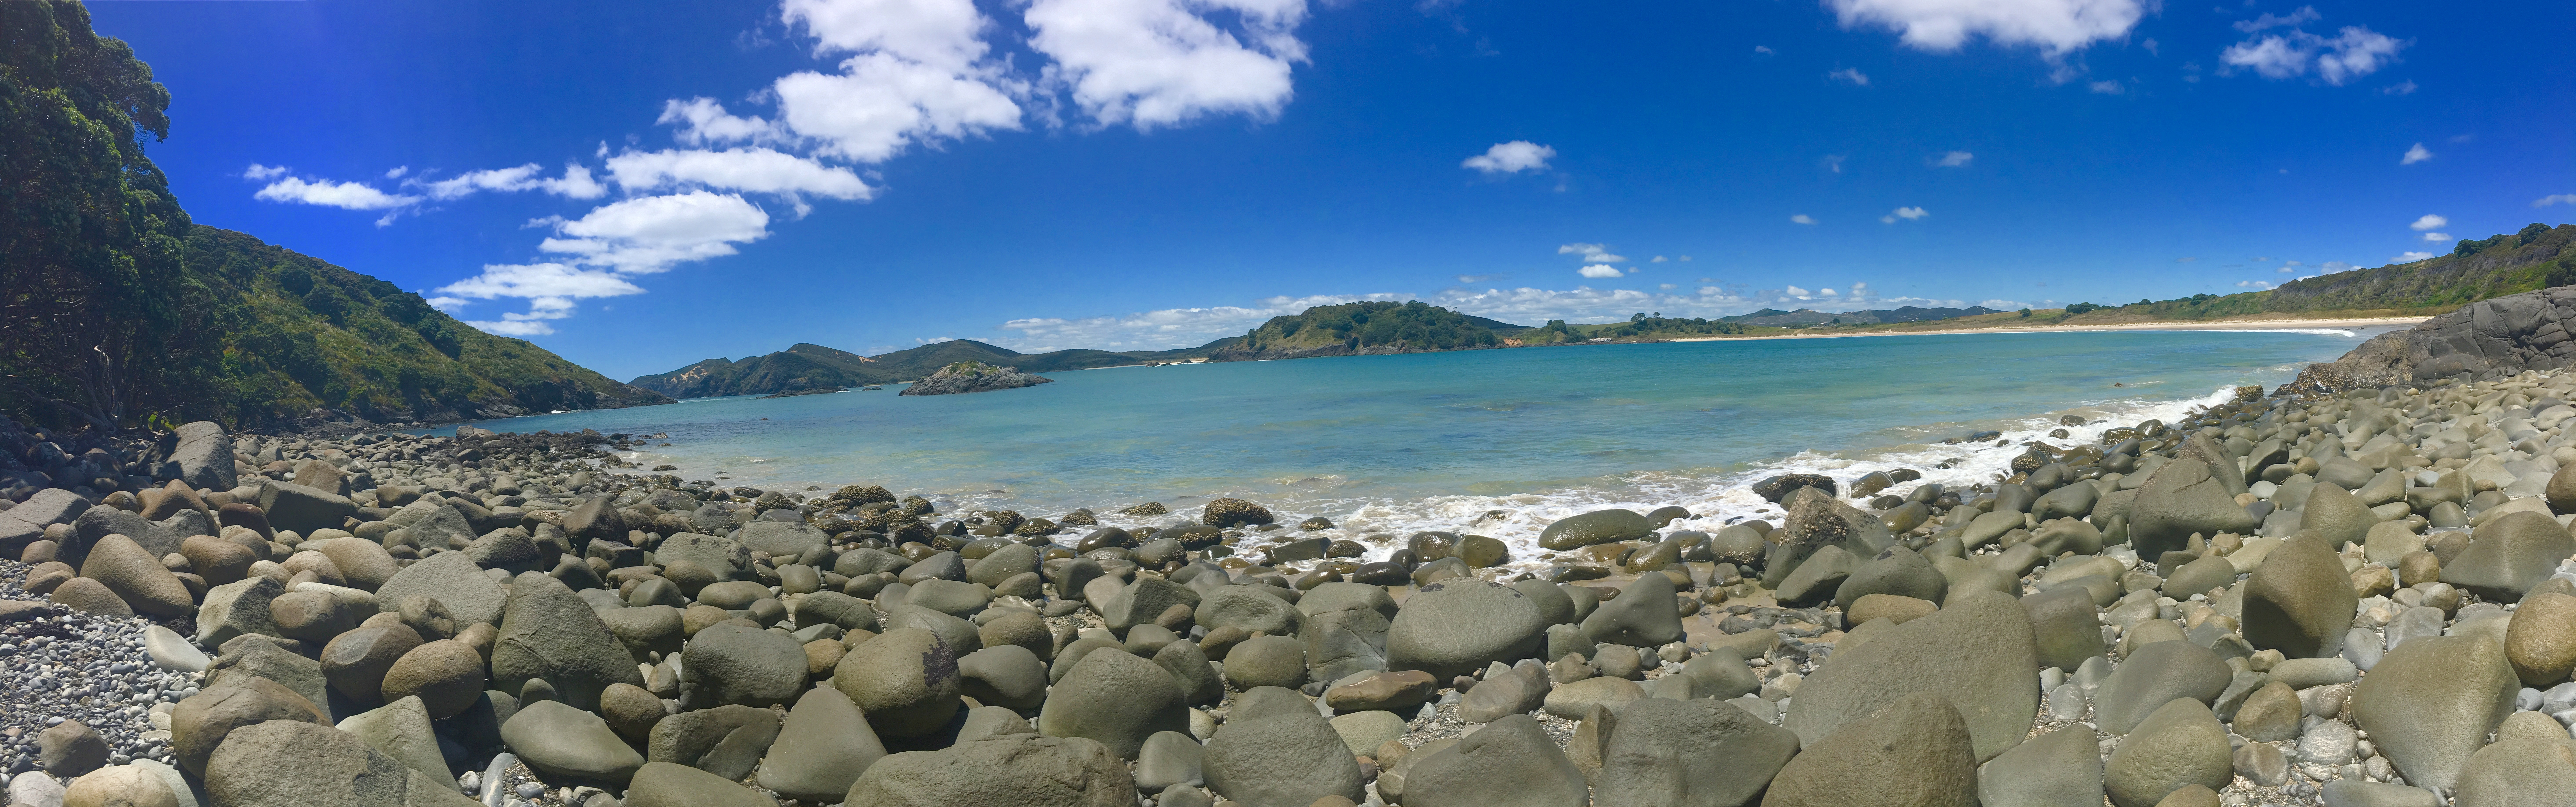 MY 5 FAVORITE BEACHES IN NORTHLAND, NEW ZEALAND